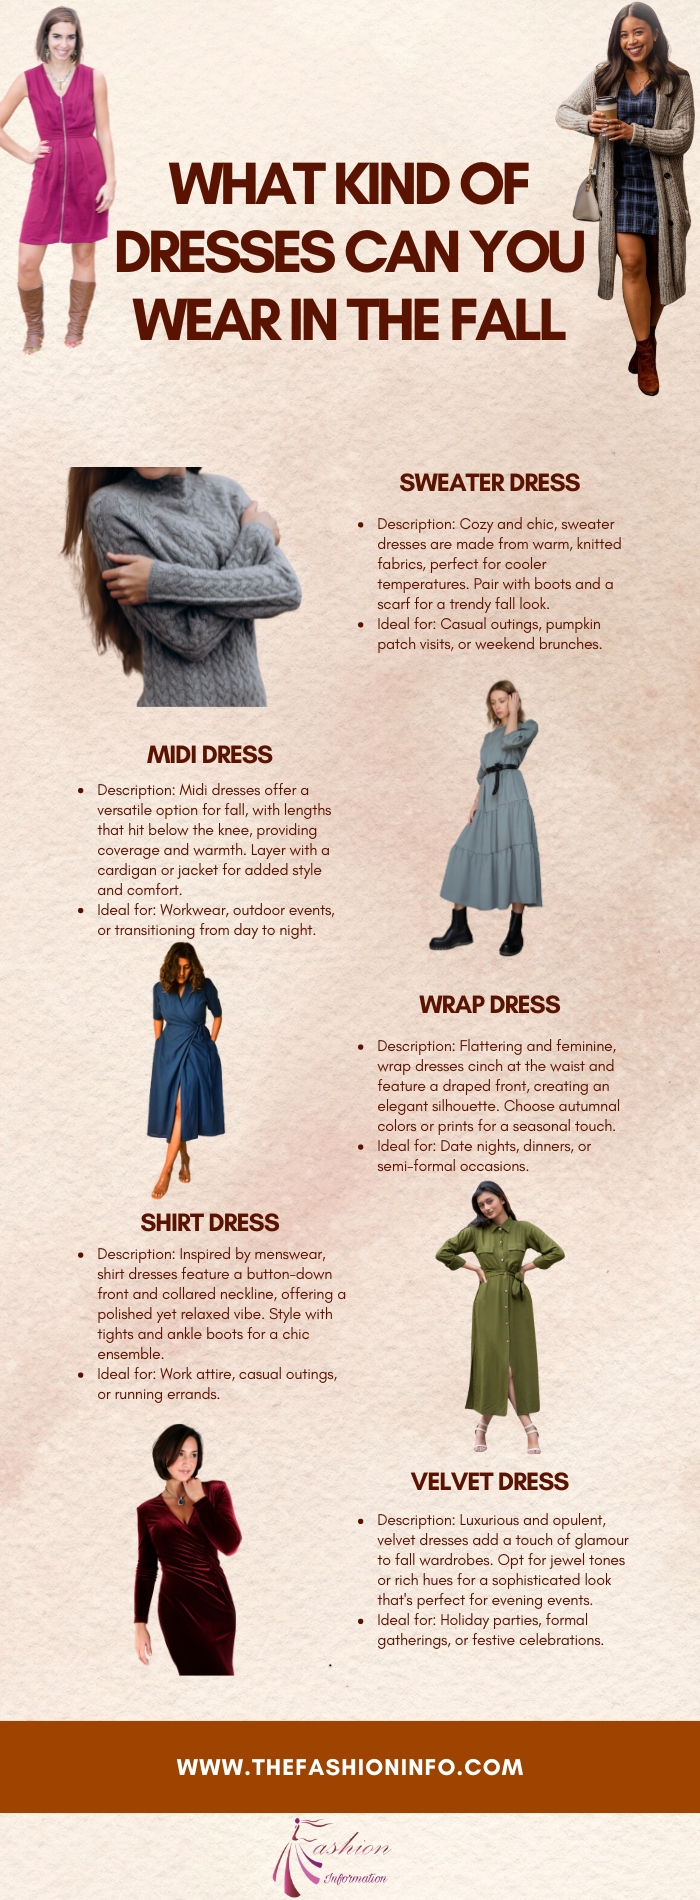 What Kind of Dresses Can You Wear In the Fall